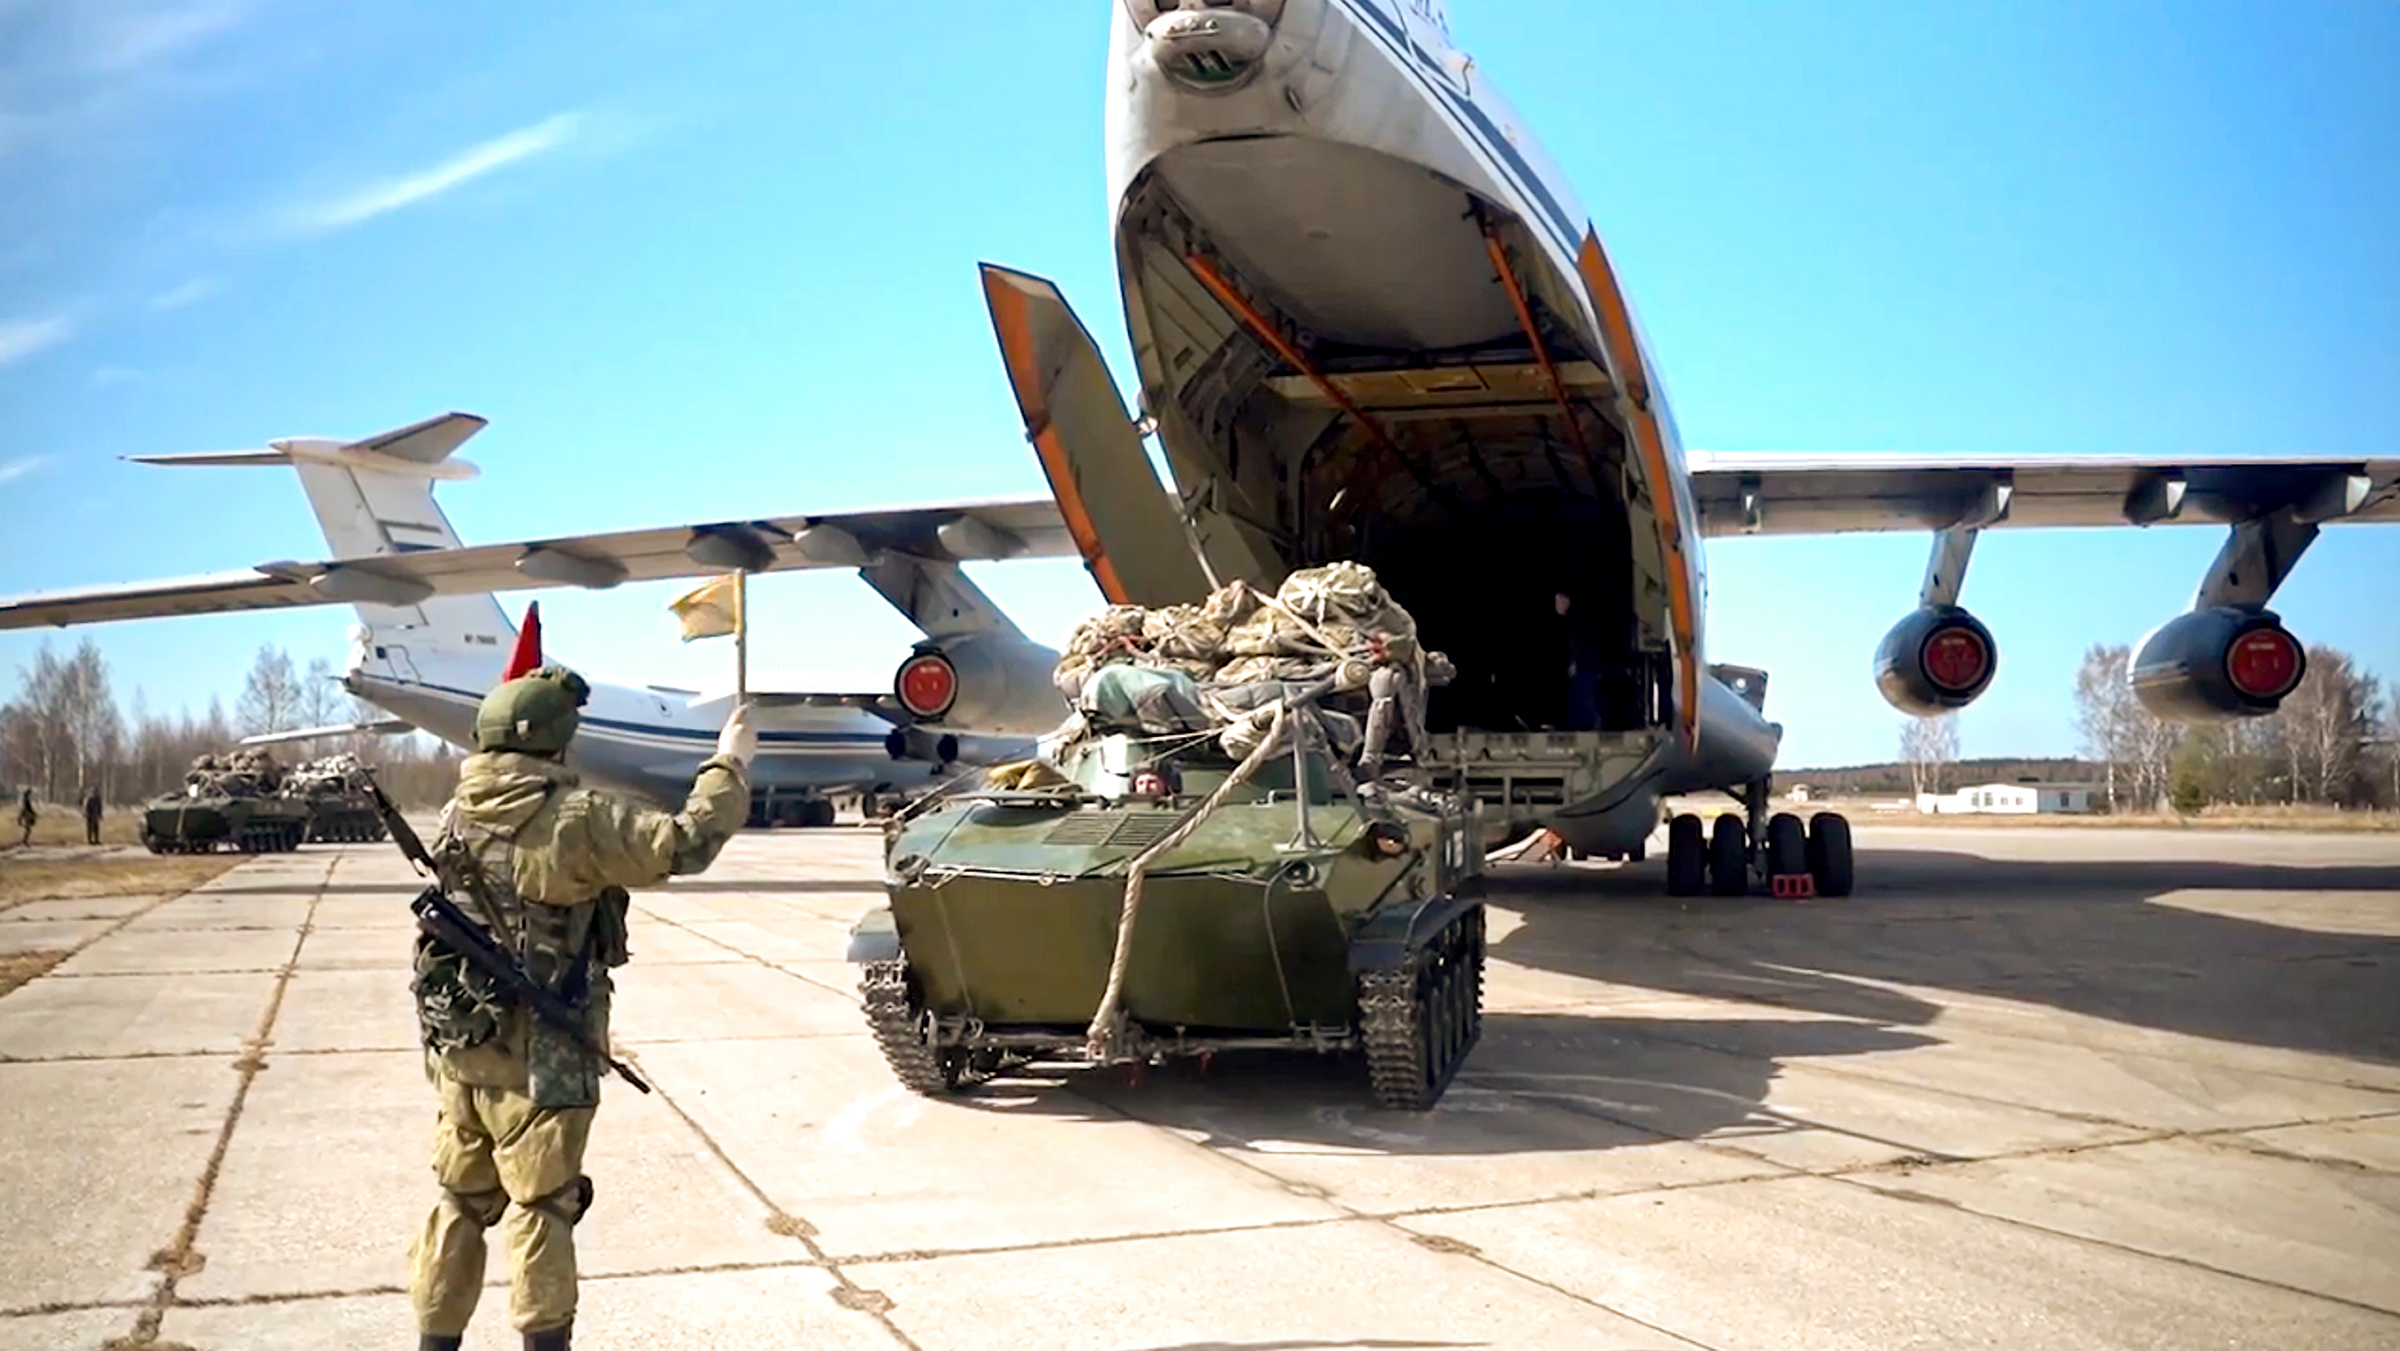 A Russian military vehicle prepares to be loaded into a plane during maneuvers in Crimea, in this image released on April 22 (Russian Defense Ministry Press Service/AP)